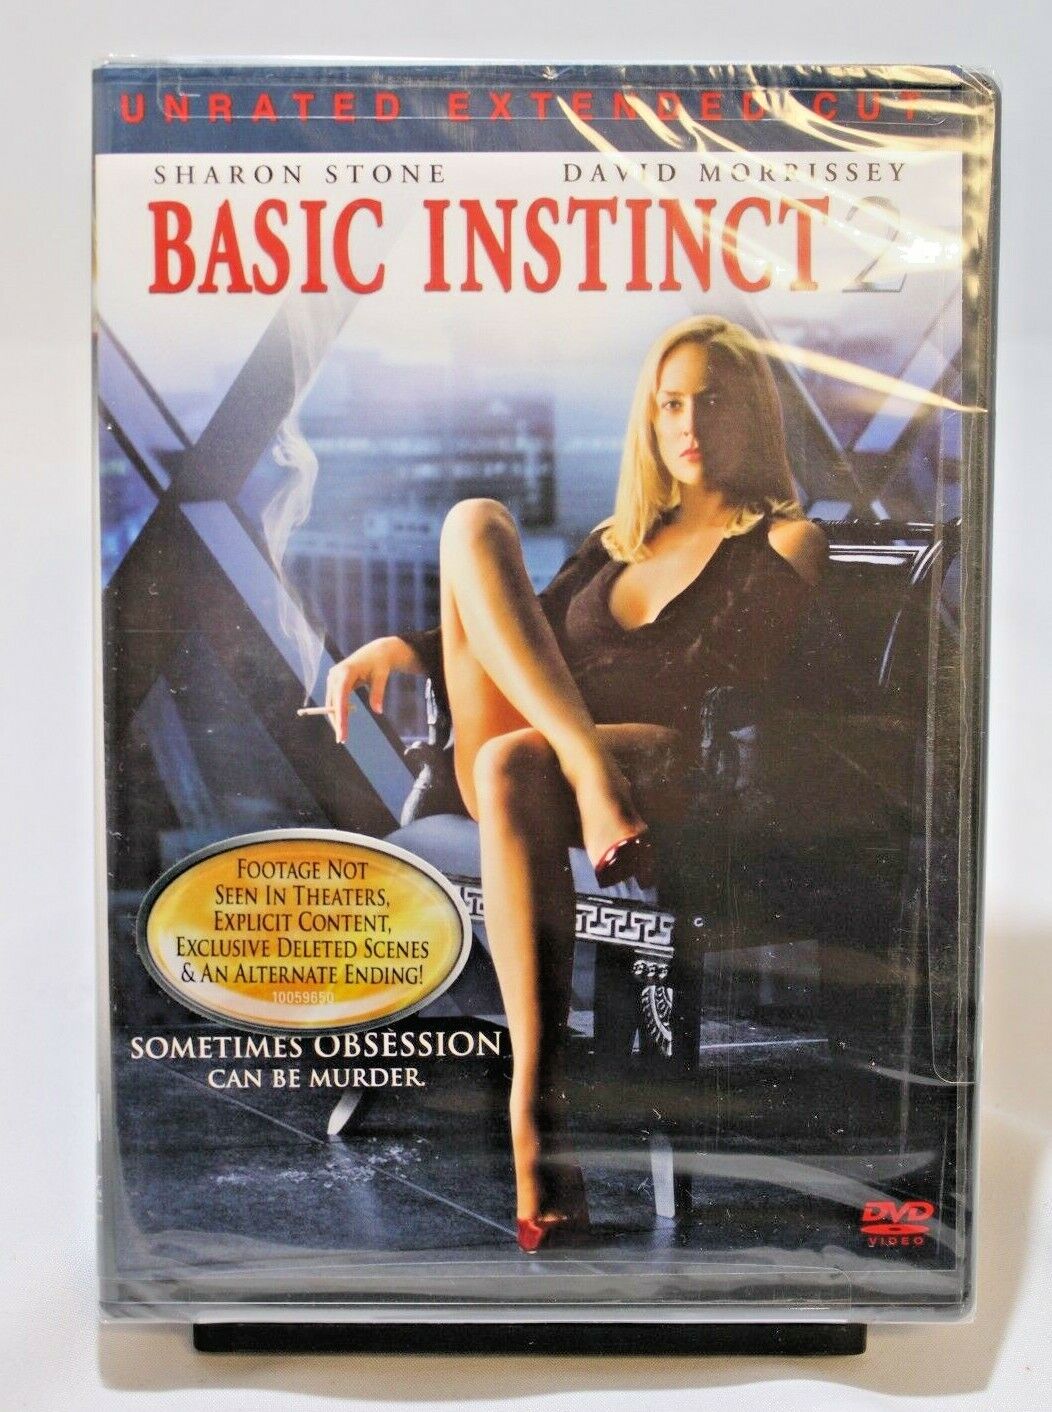 boone parker recommends Basic Instinct Deleted Scenes